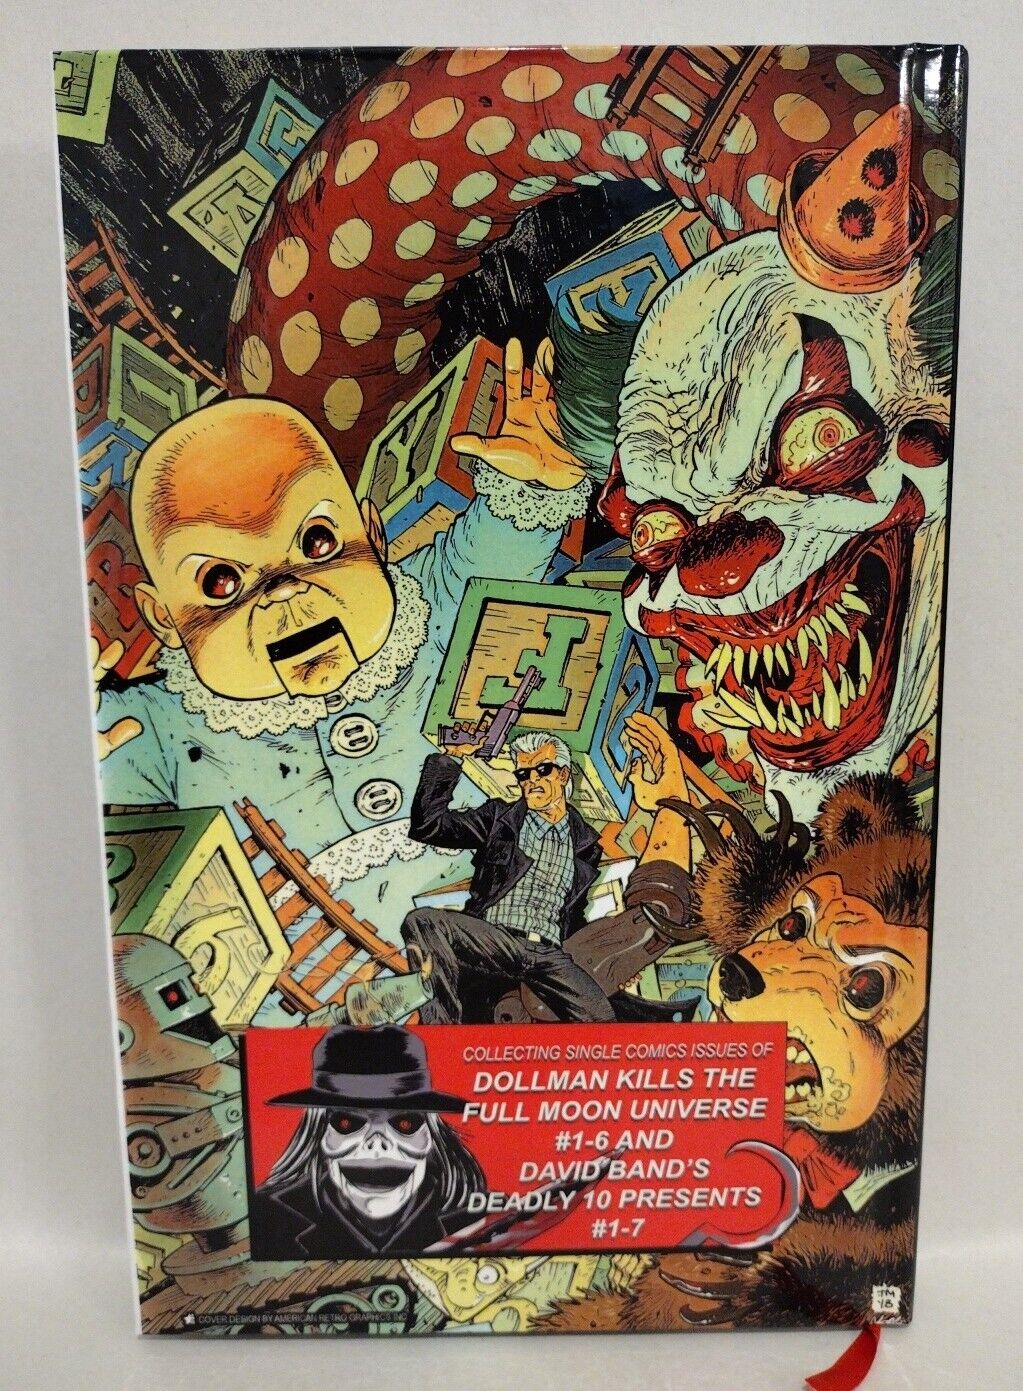 Full Moon Comix Library Edition Custom Bound Comic Hardcover ARG 166 Deadly Ten